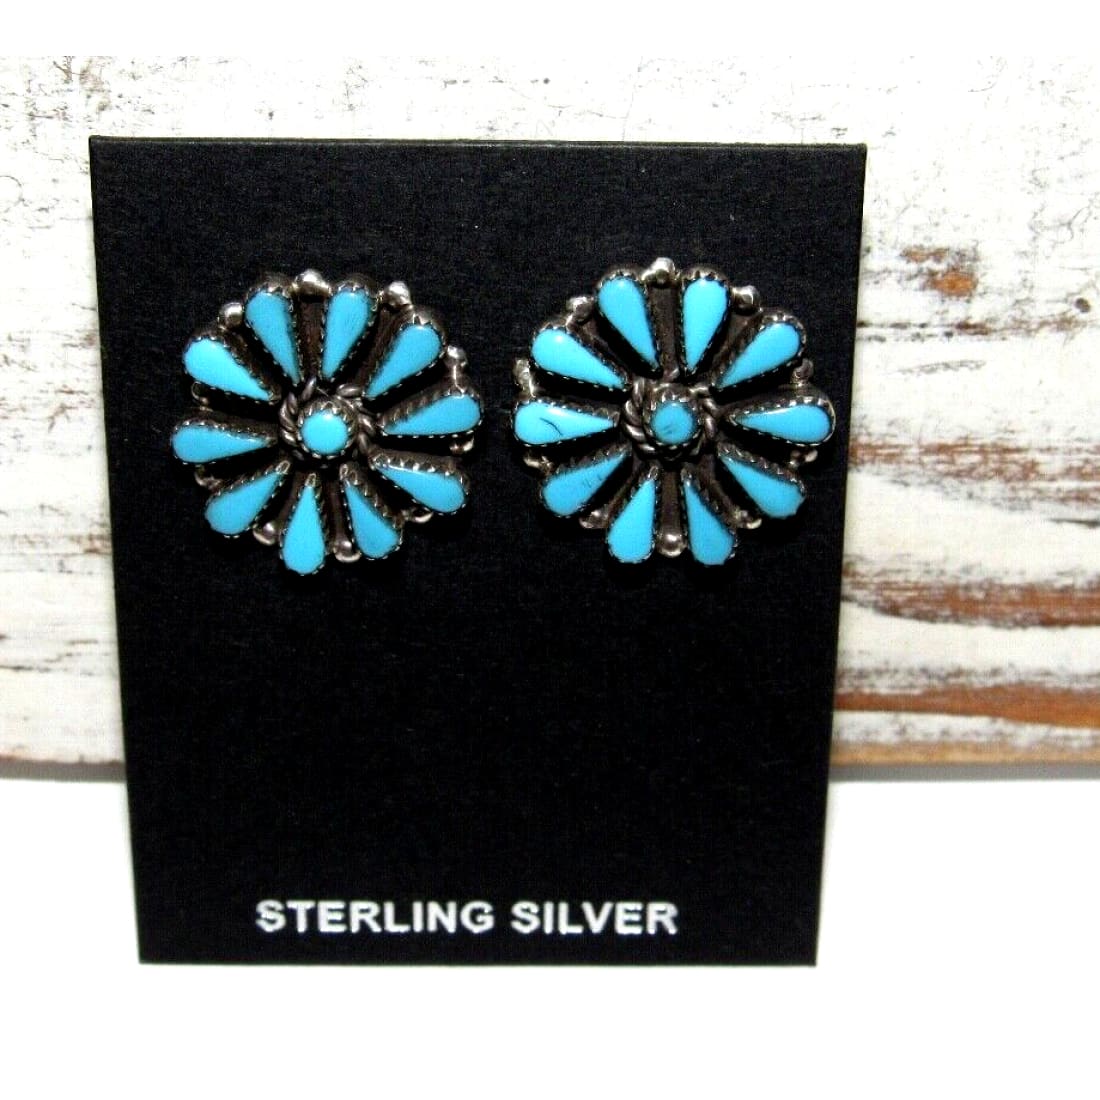 Zuni Turquoise Cluster Earrings Sterling Silver - Jewelry &